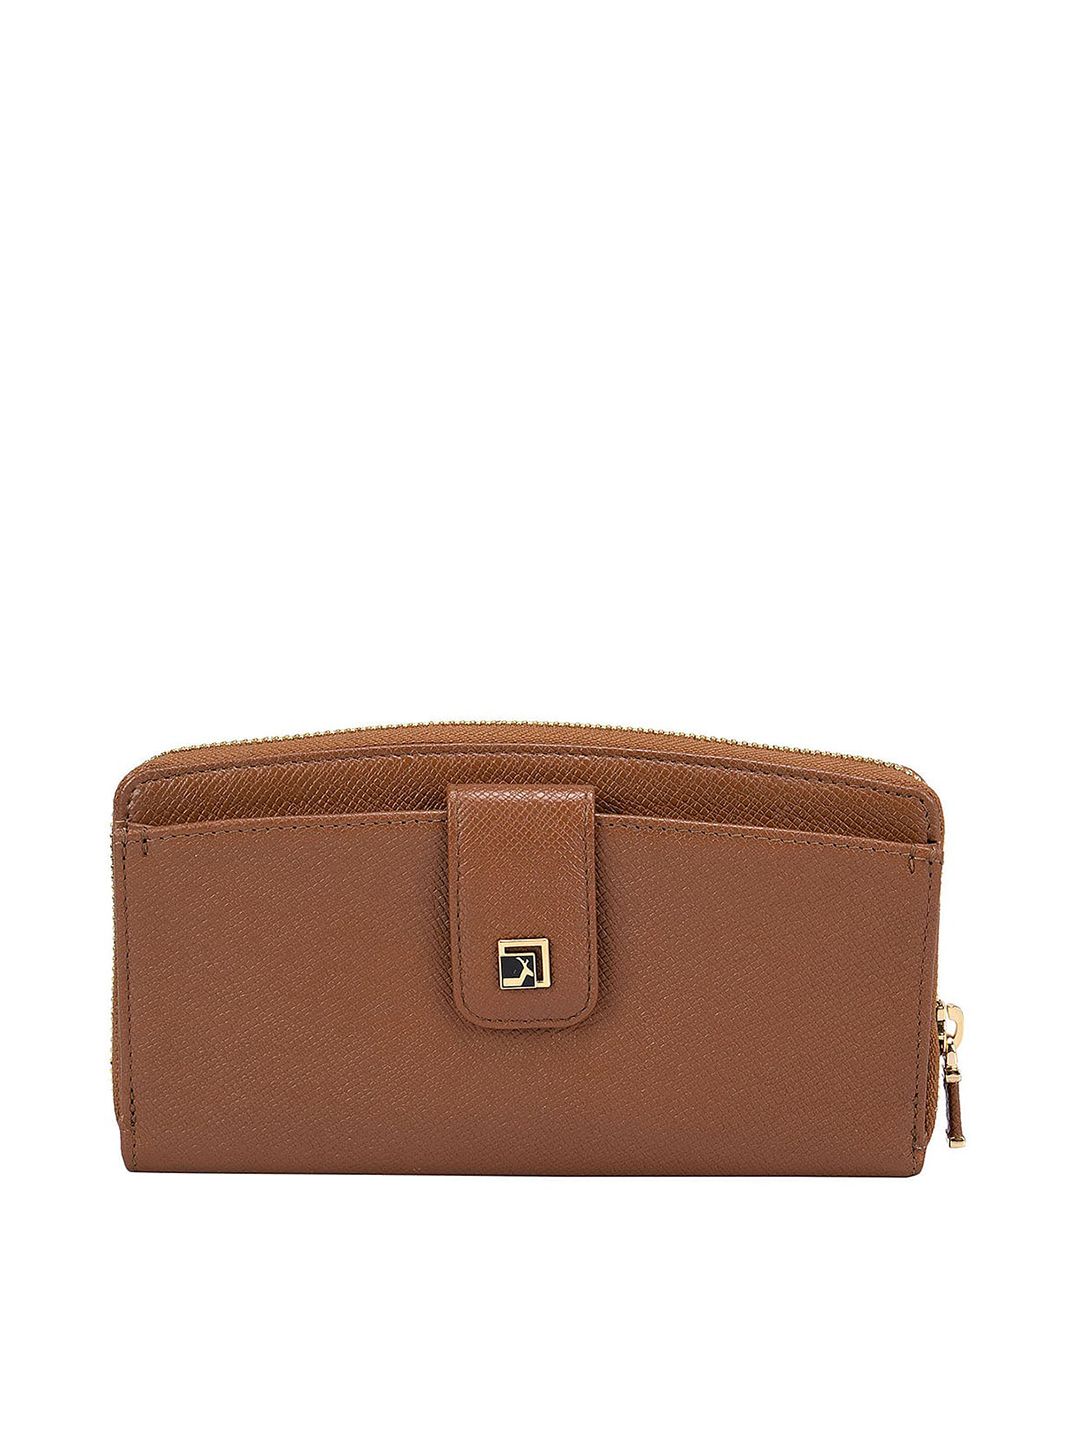 Da Milano Women Brown Solid Leather Zip Around Wallet Price in India